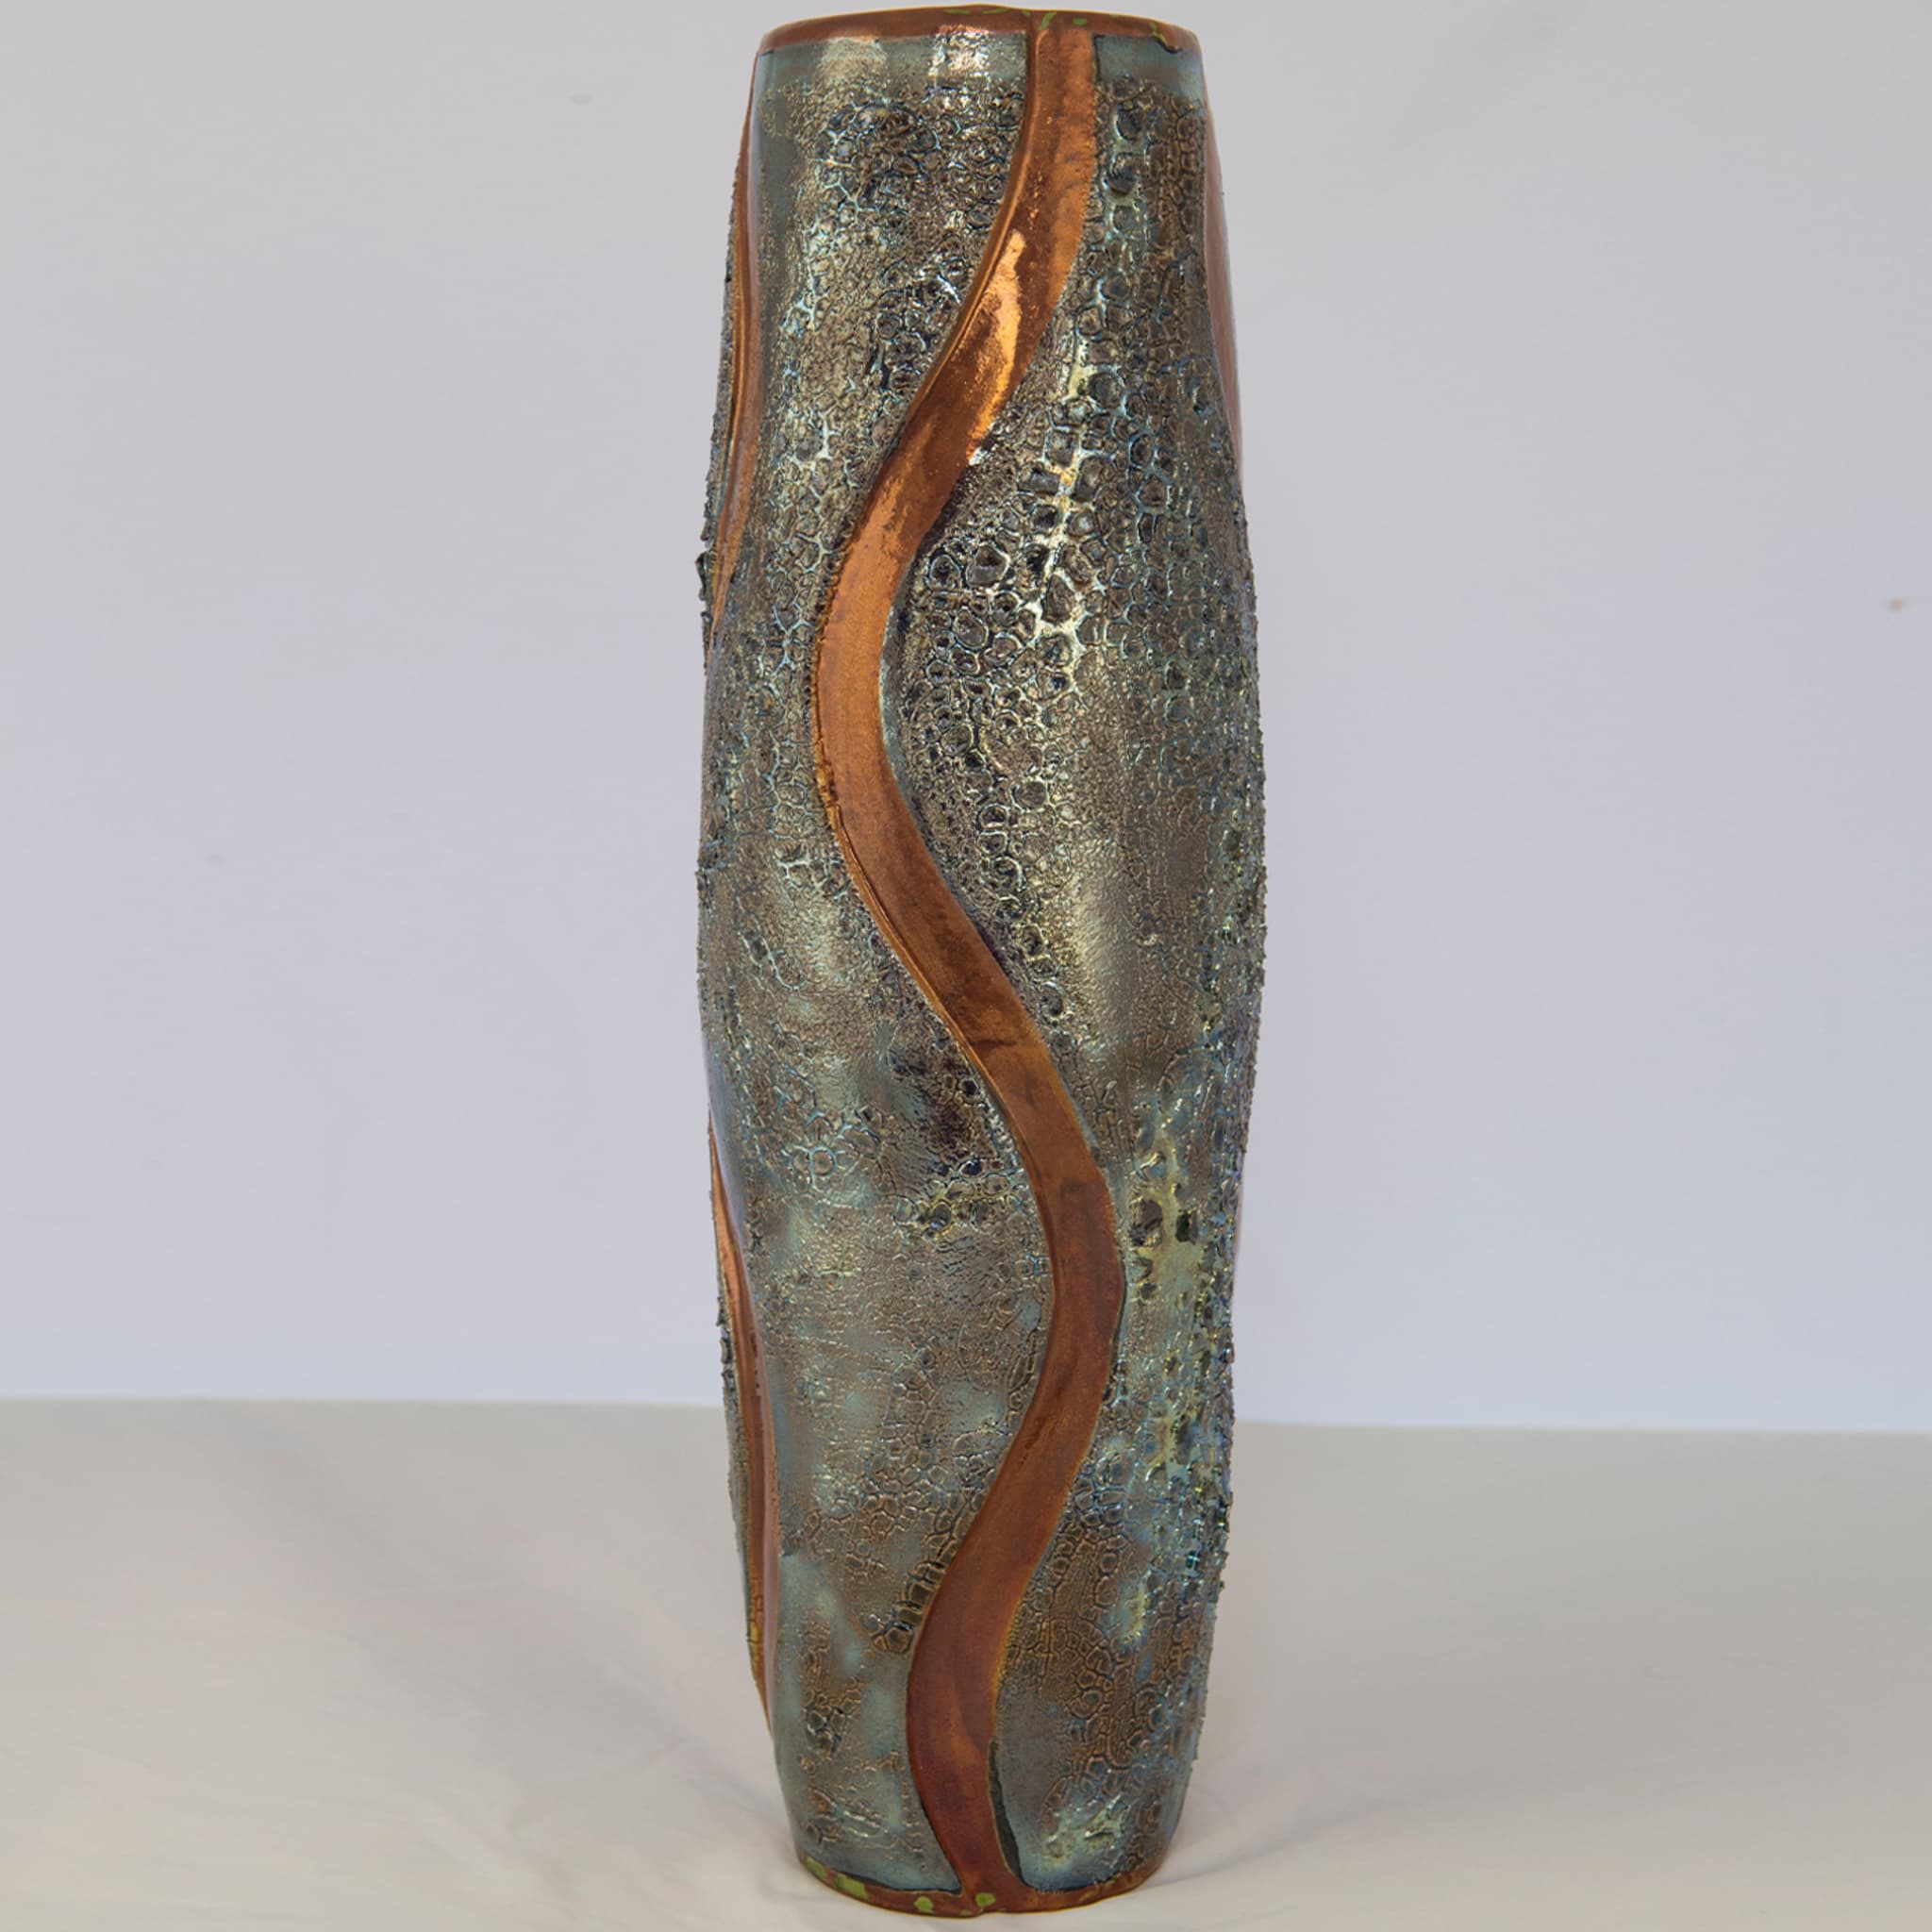 Copper and Silver Lustre with Crust Vase - Alternative view 1